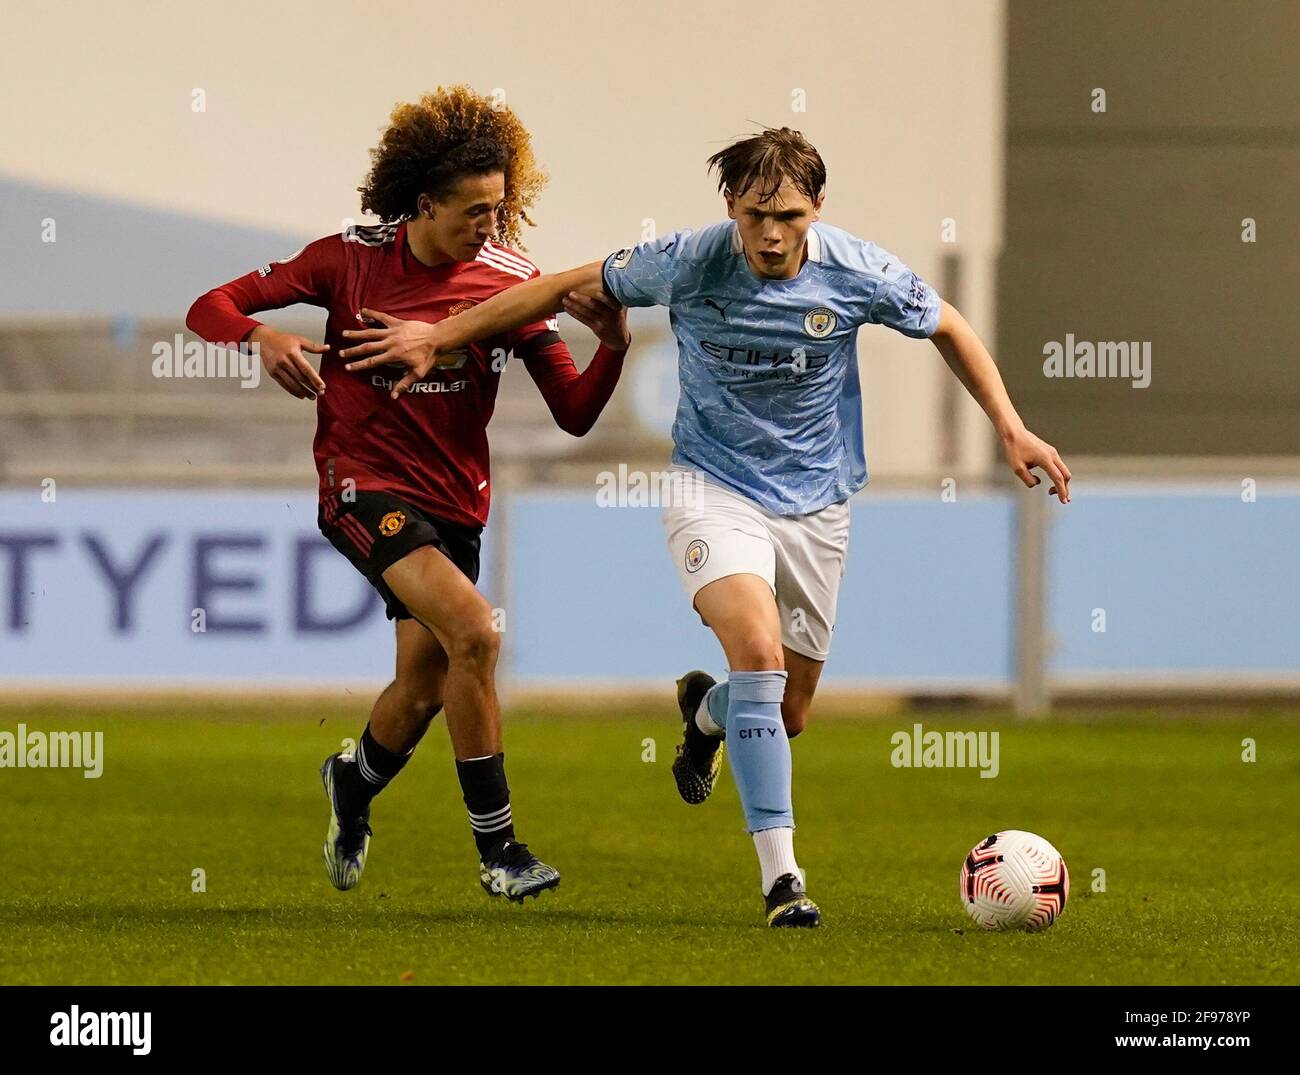 Manchester, England, 16th April 2021. Callum Doyle of Manchester City tackled by Hannibal Mejbri of Manchester Utdduring the Professional Development League match at Academy Stadium, Manchester. Picture credit should read: Andrew Yates / Sportimage Stock Photo